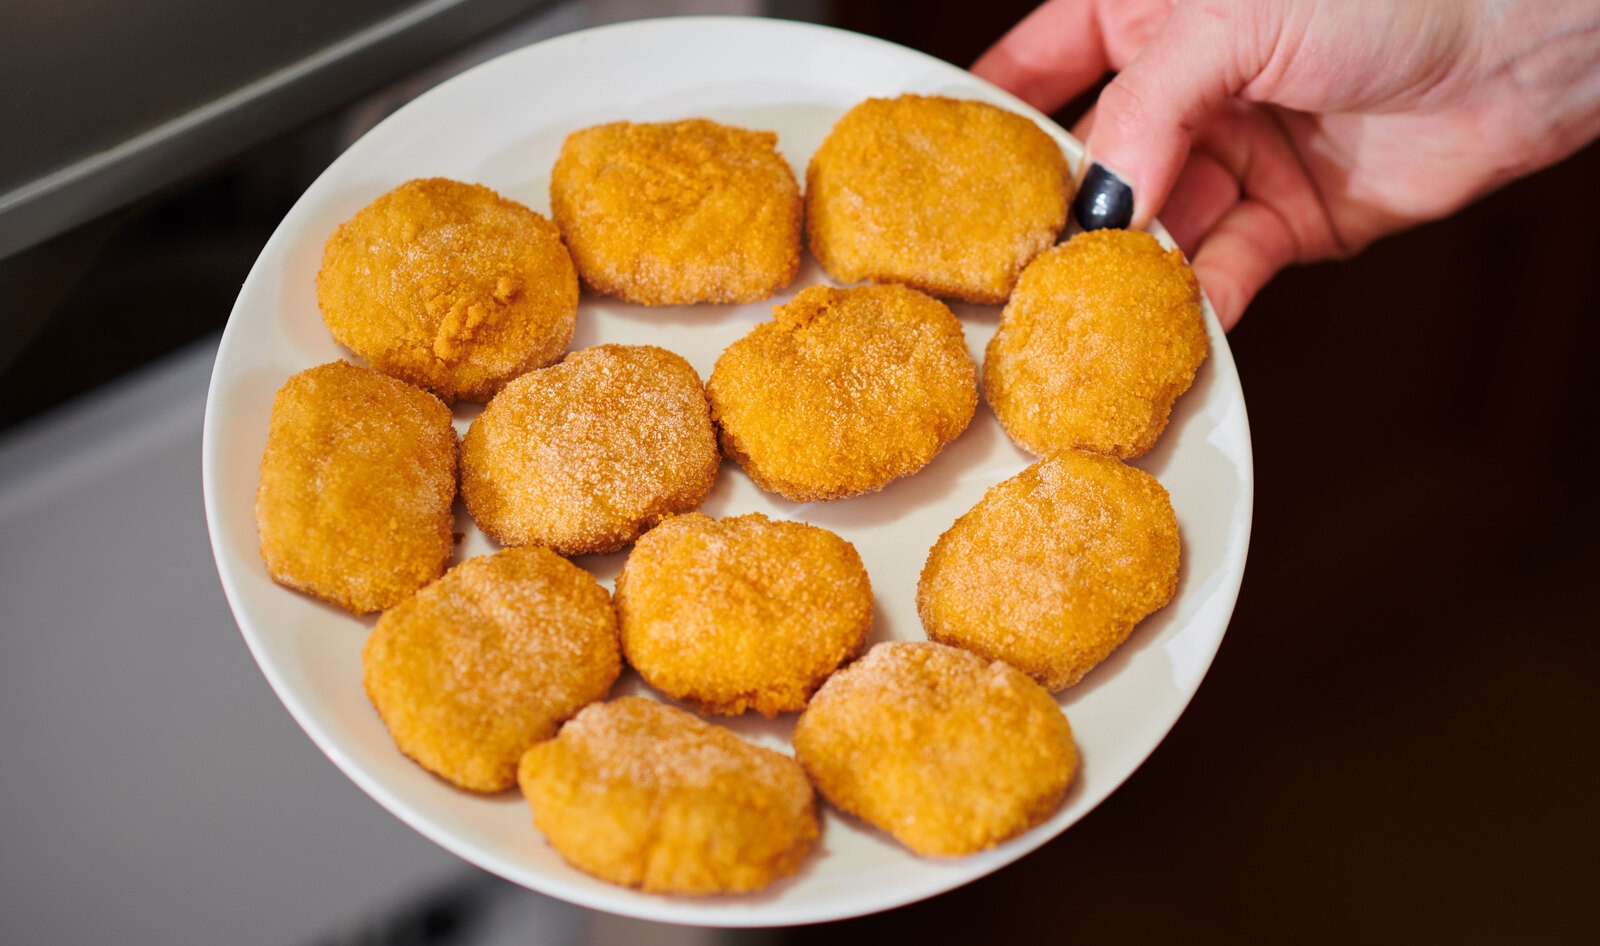 Affordable One-Pound Packs of Vegan Chicken Nuggets Are Coming to Stores